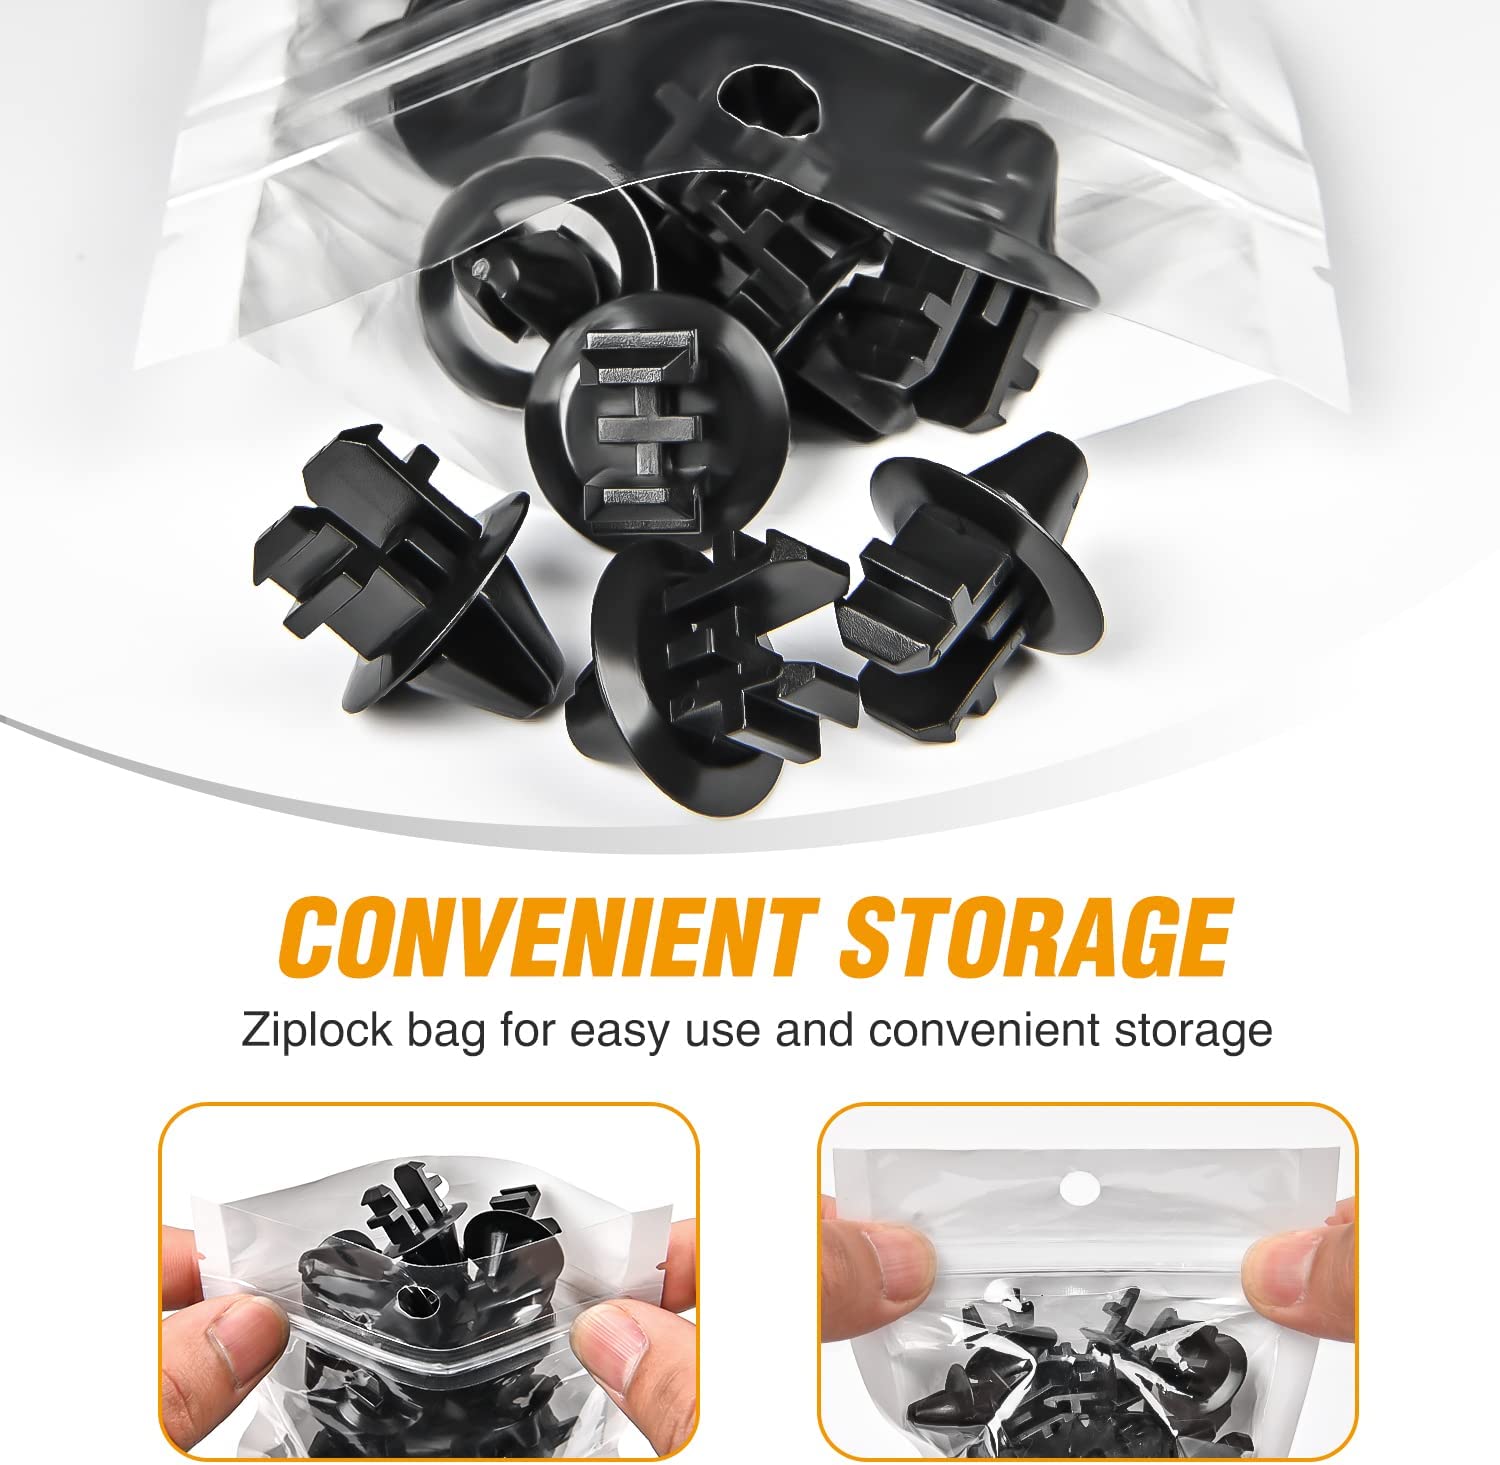 25 Pcs Head 20mm Hole 13mm Radiator Shroud Grille Retainer Clips For Ford Expedition F-150 F-250 F-350 F-450 F-550 Super Duty Lincoln Mark LT Nilight